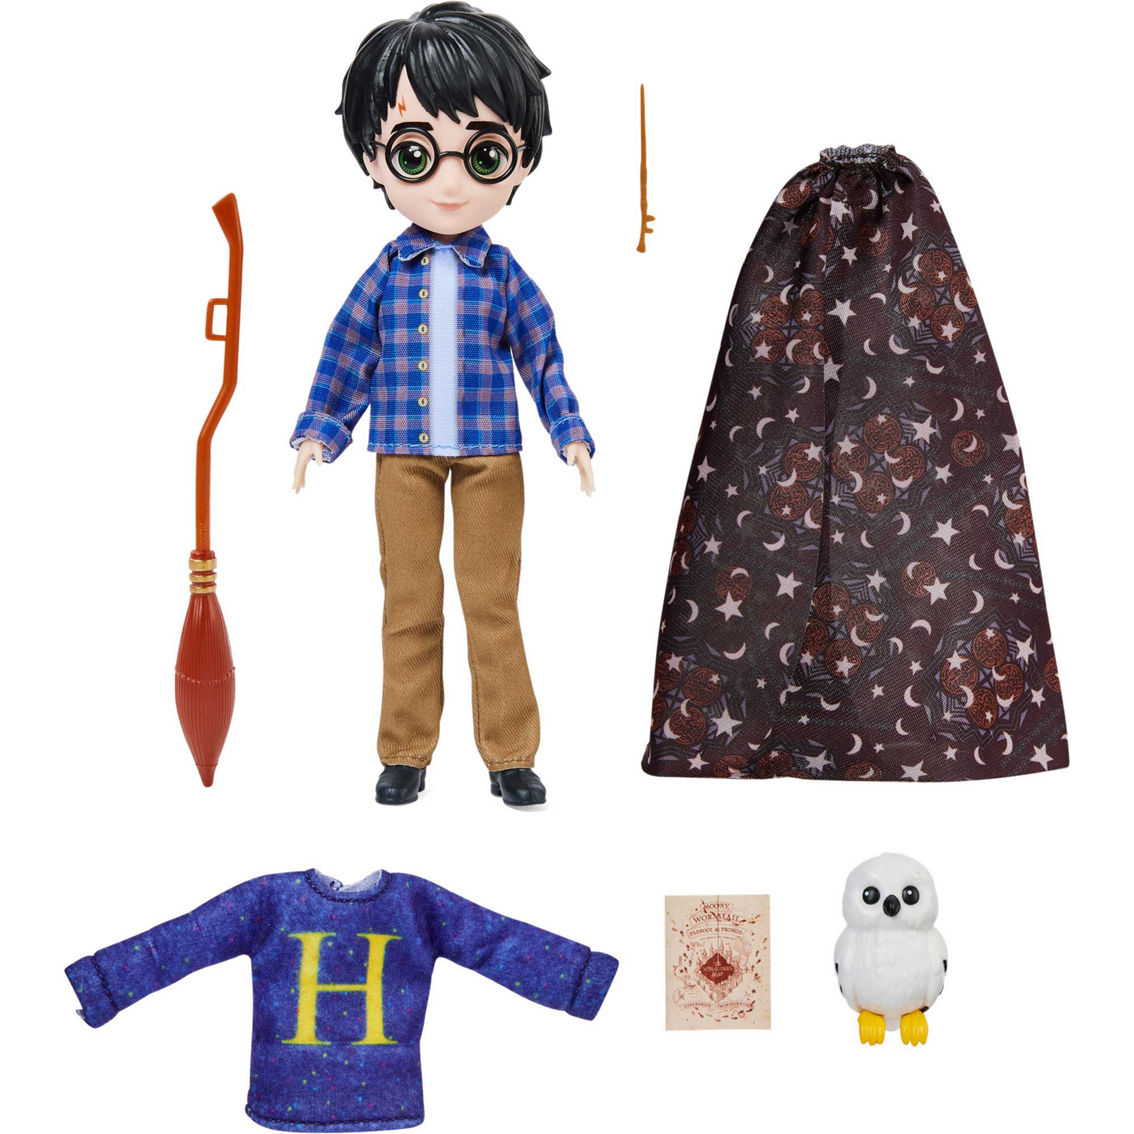 Wizarding World 8 in. Deluxe Harry Potter Doll - Image 2 of 9